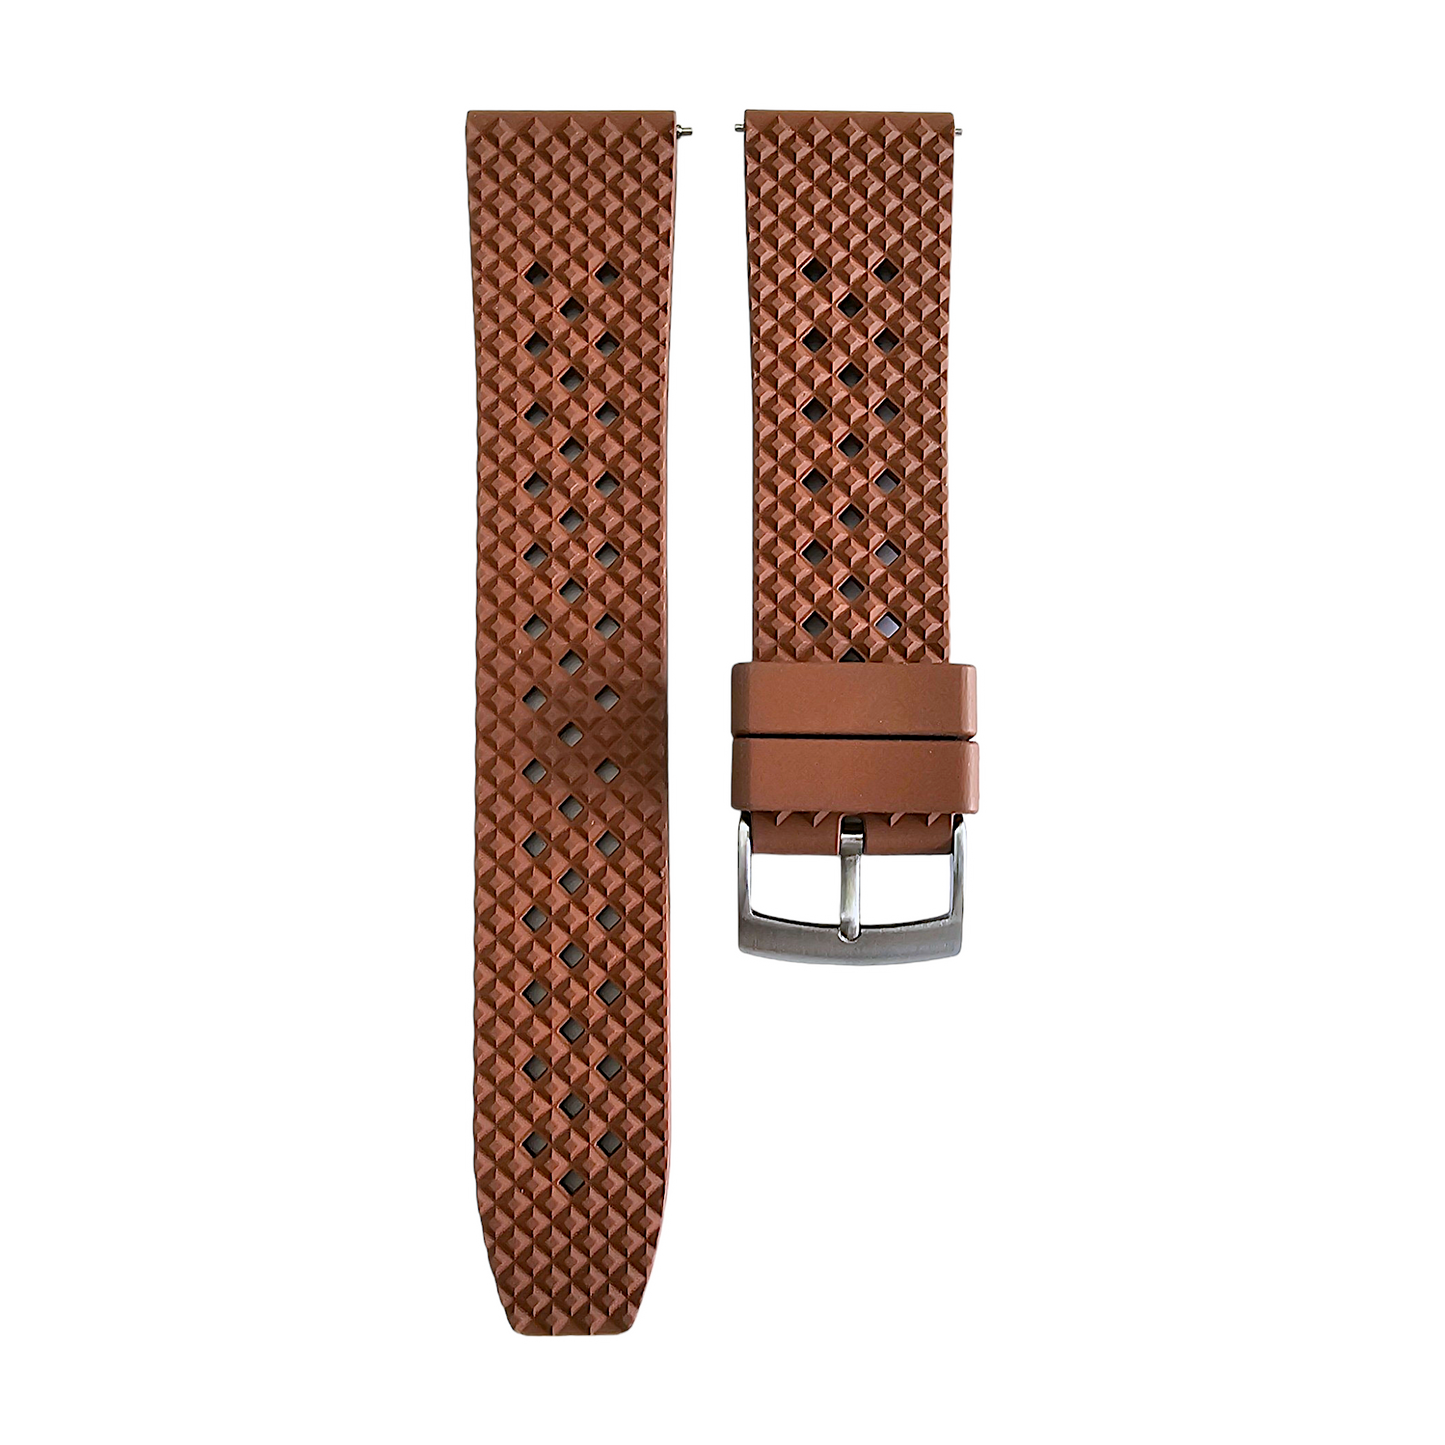 FKM Rubber Honeycomb Divers Watch Strap Band 20mm 22mm Brown